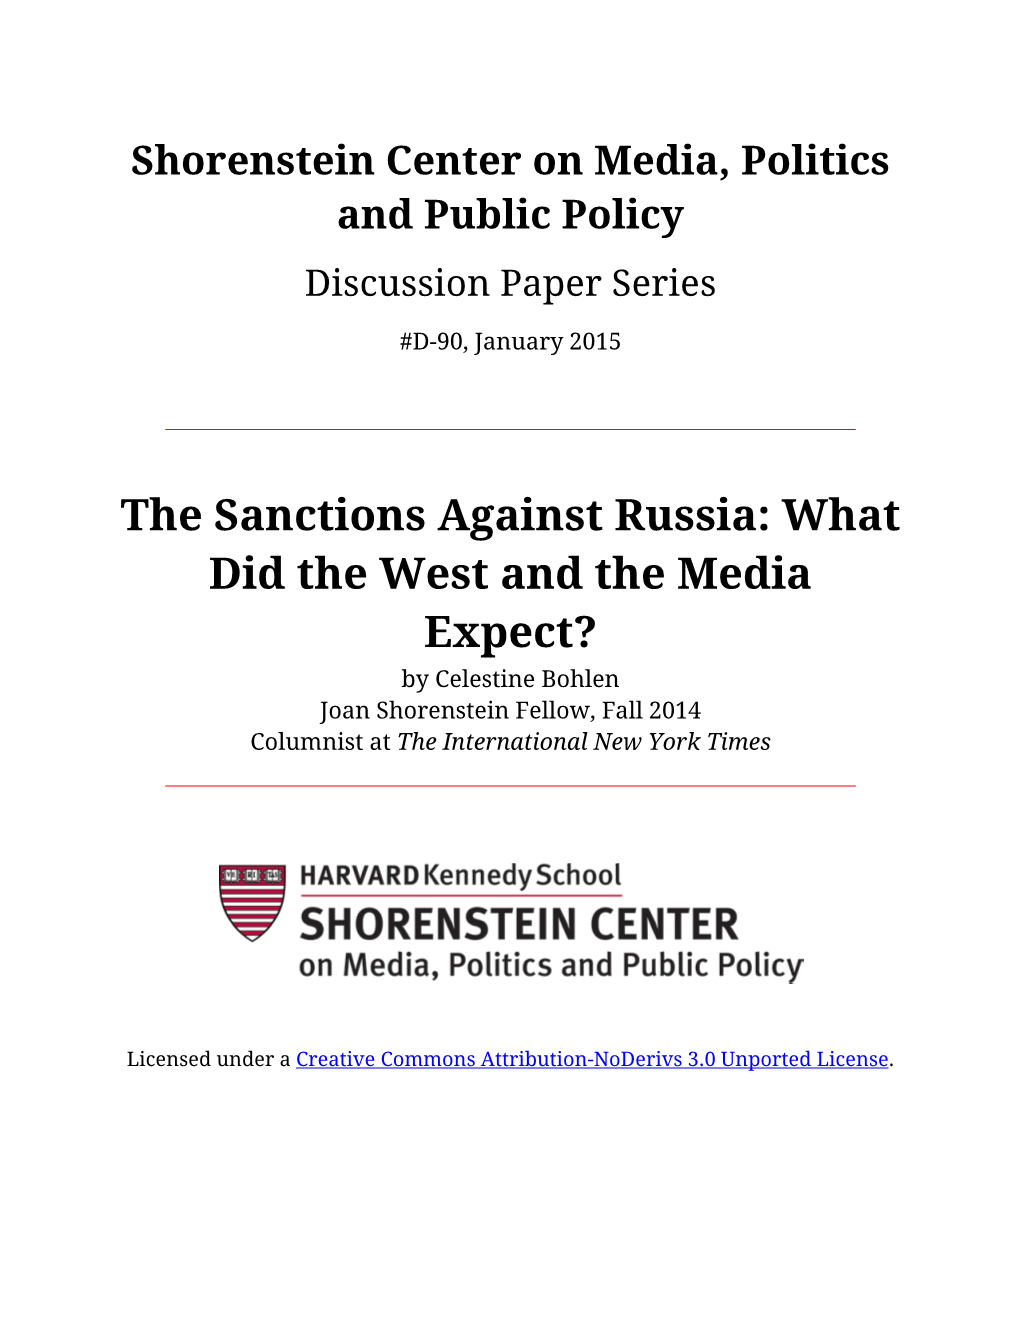 The Sanctions Against Russia: What Did the West and the Media